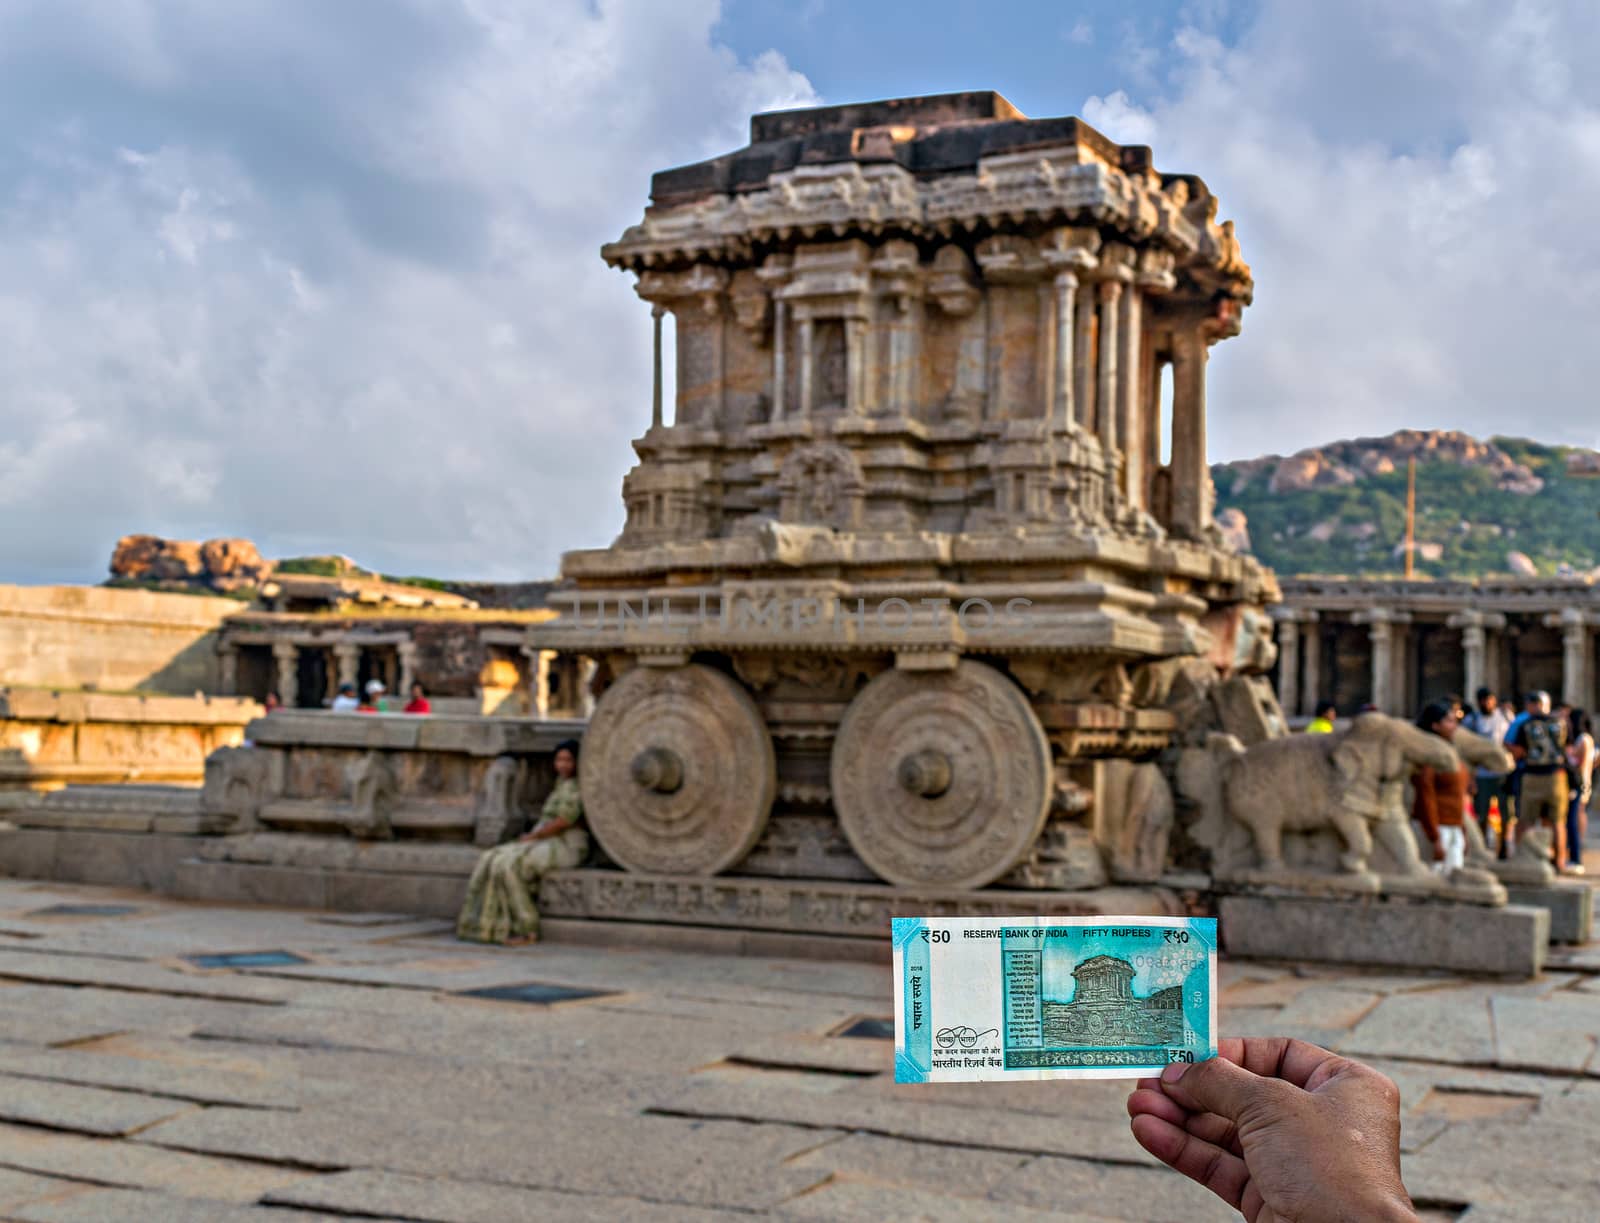 Image of Rs.50 Indian currency note that features richly sculpted ancient stone chariot at Viththla temple in Hampi, Karnataka. It is considered to be the most stunning architecture of the Vijayanagara kingdom.